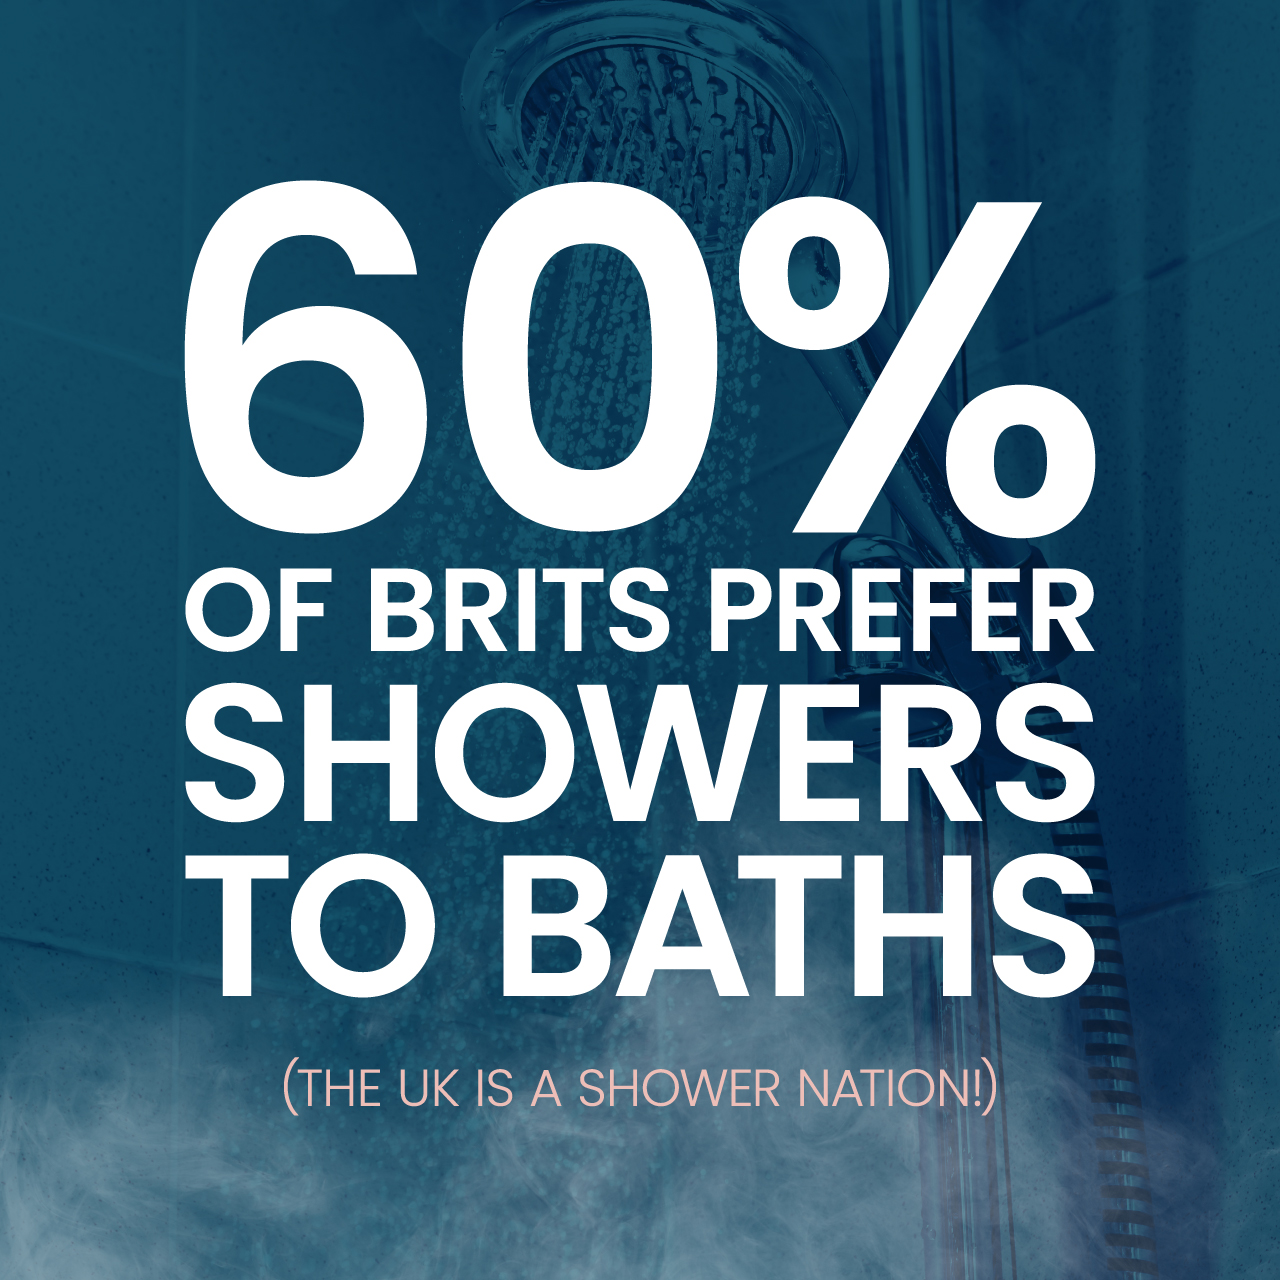 graphic showing that 60% of brits prefer showering to baths